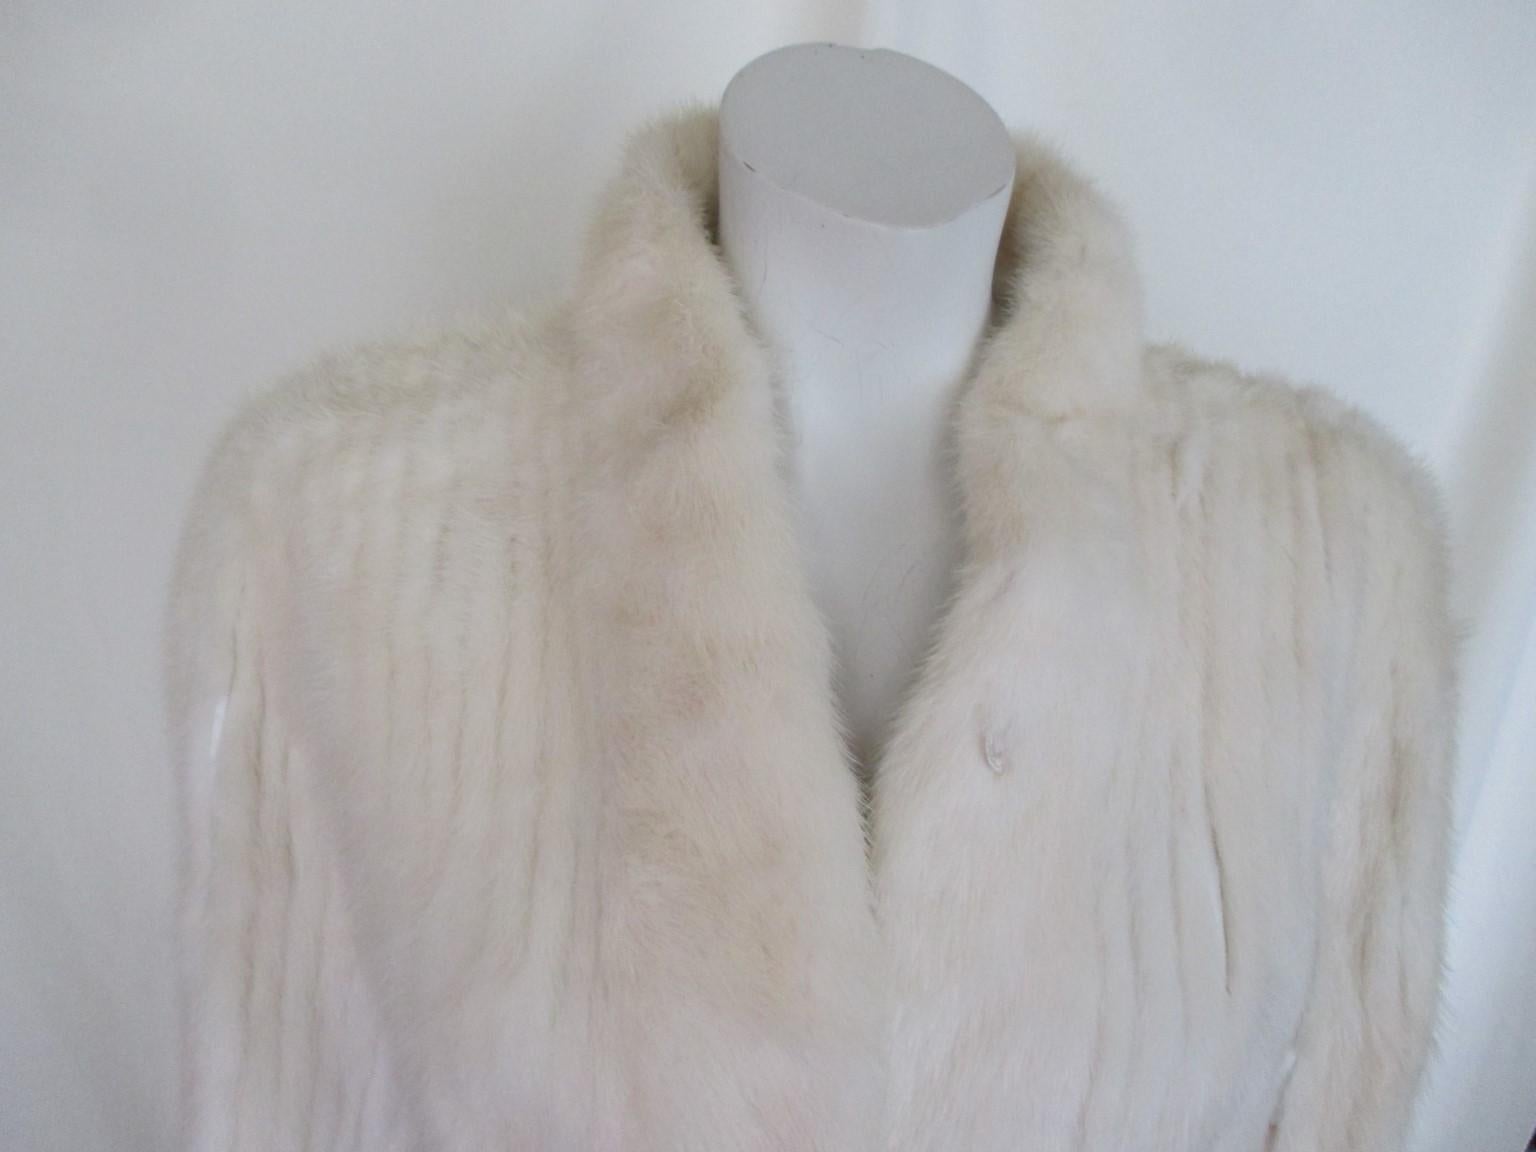 This exclusive mink fur jacket in Fendi style, is made by Hopper furs, st Louis USA 

We offer more exclusive fur and vintage items, view our frontstore

Details:
Color:  crème/white is rare to find
With 2 velvet pockets and 3 closing hooks 
Fully